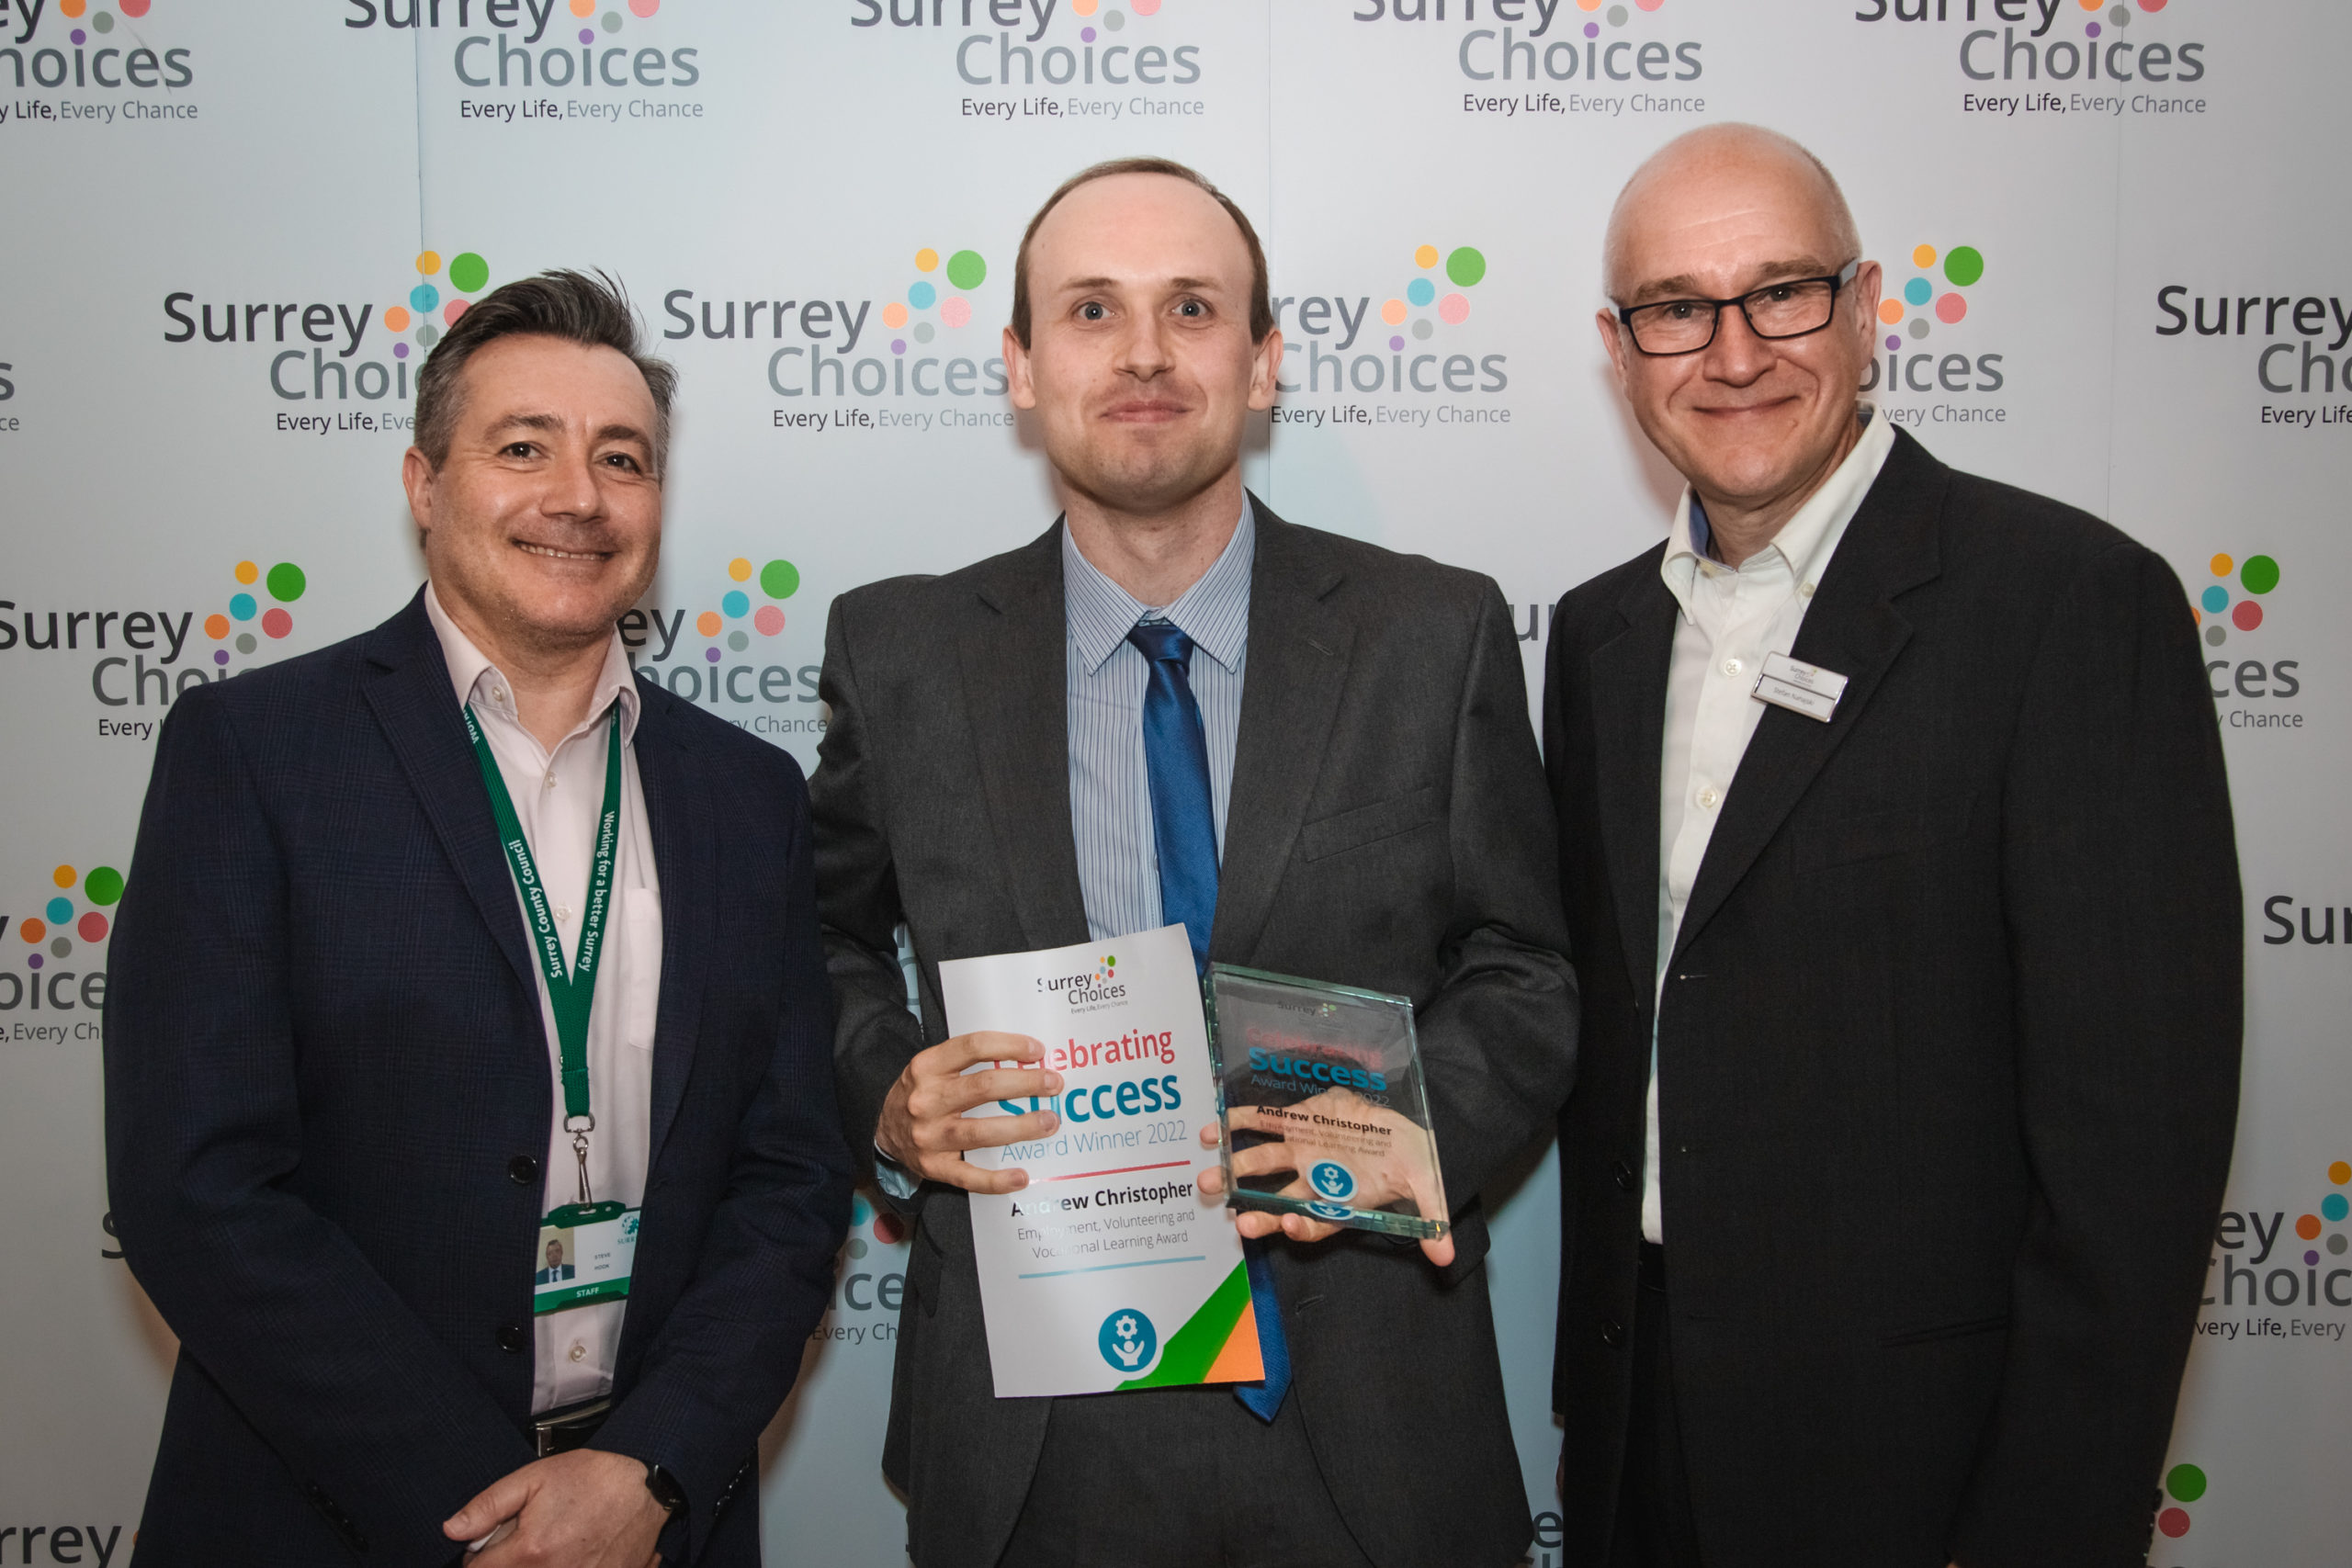 Andrew with his award alongside Surrey County Council Assistant Director Steve and Surrey Choices Board Member Stefan